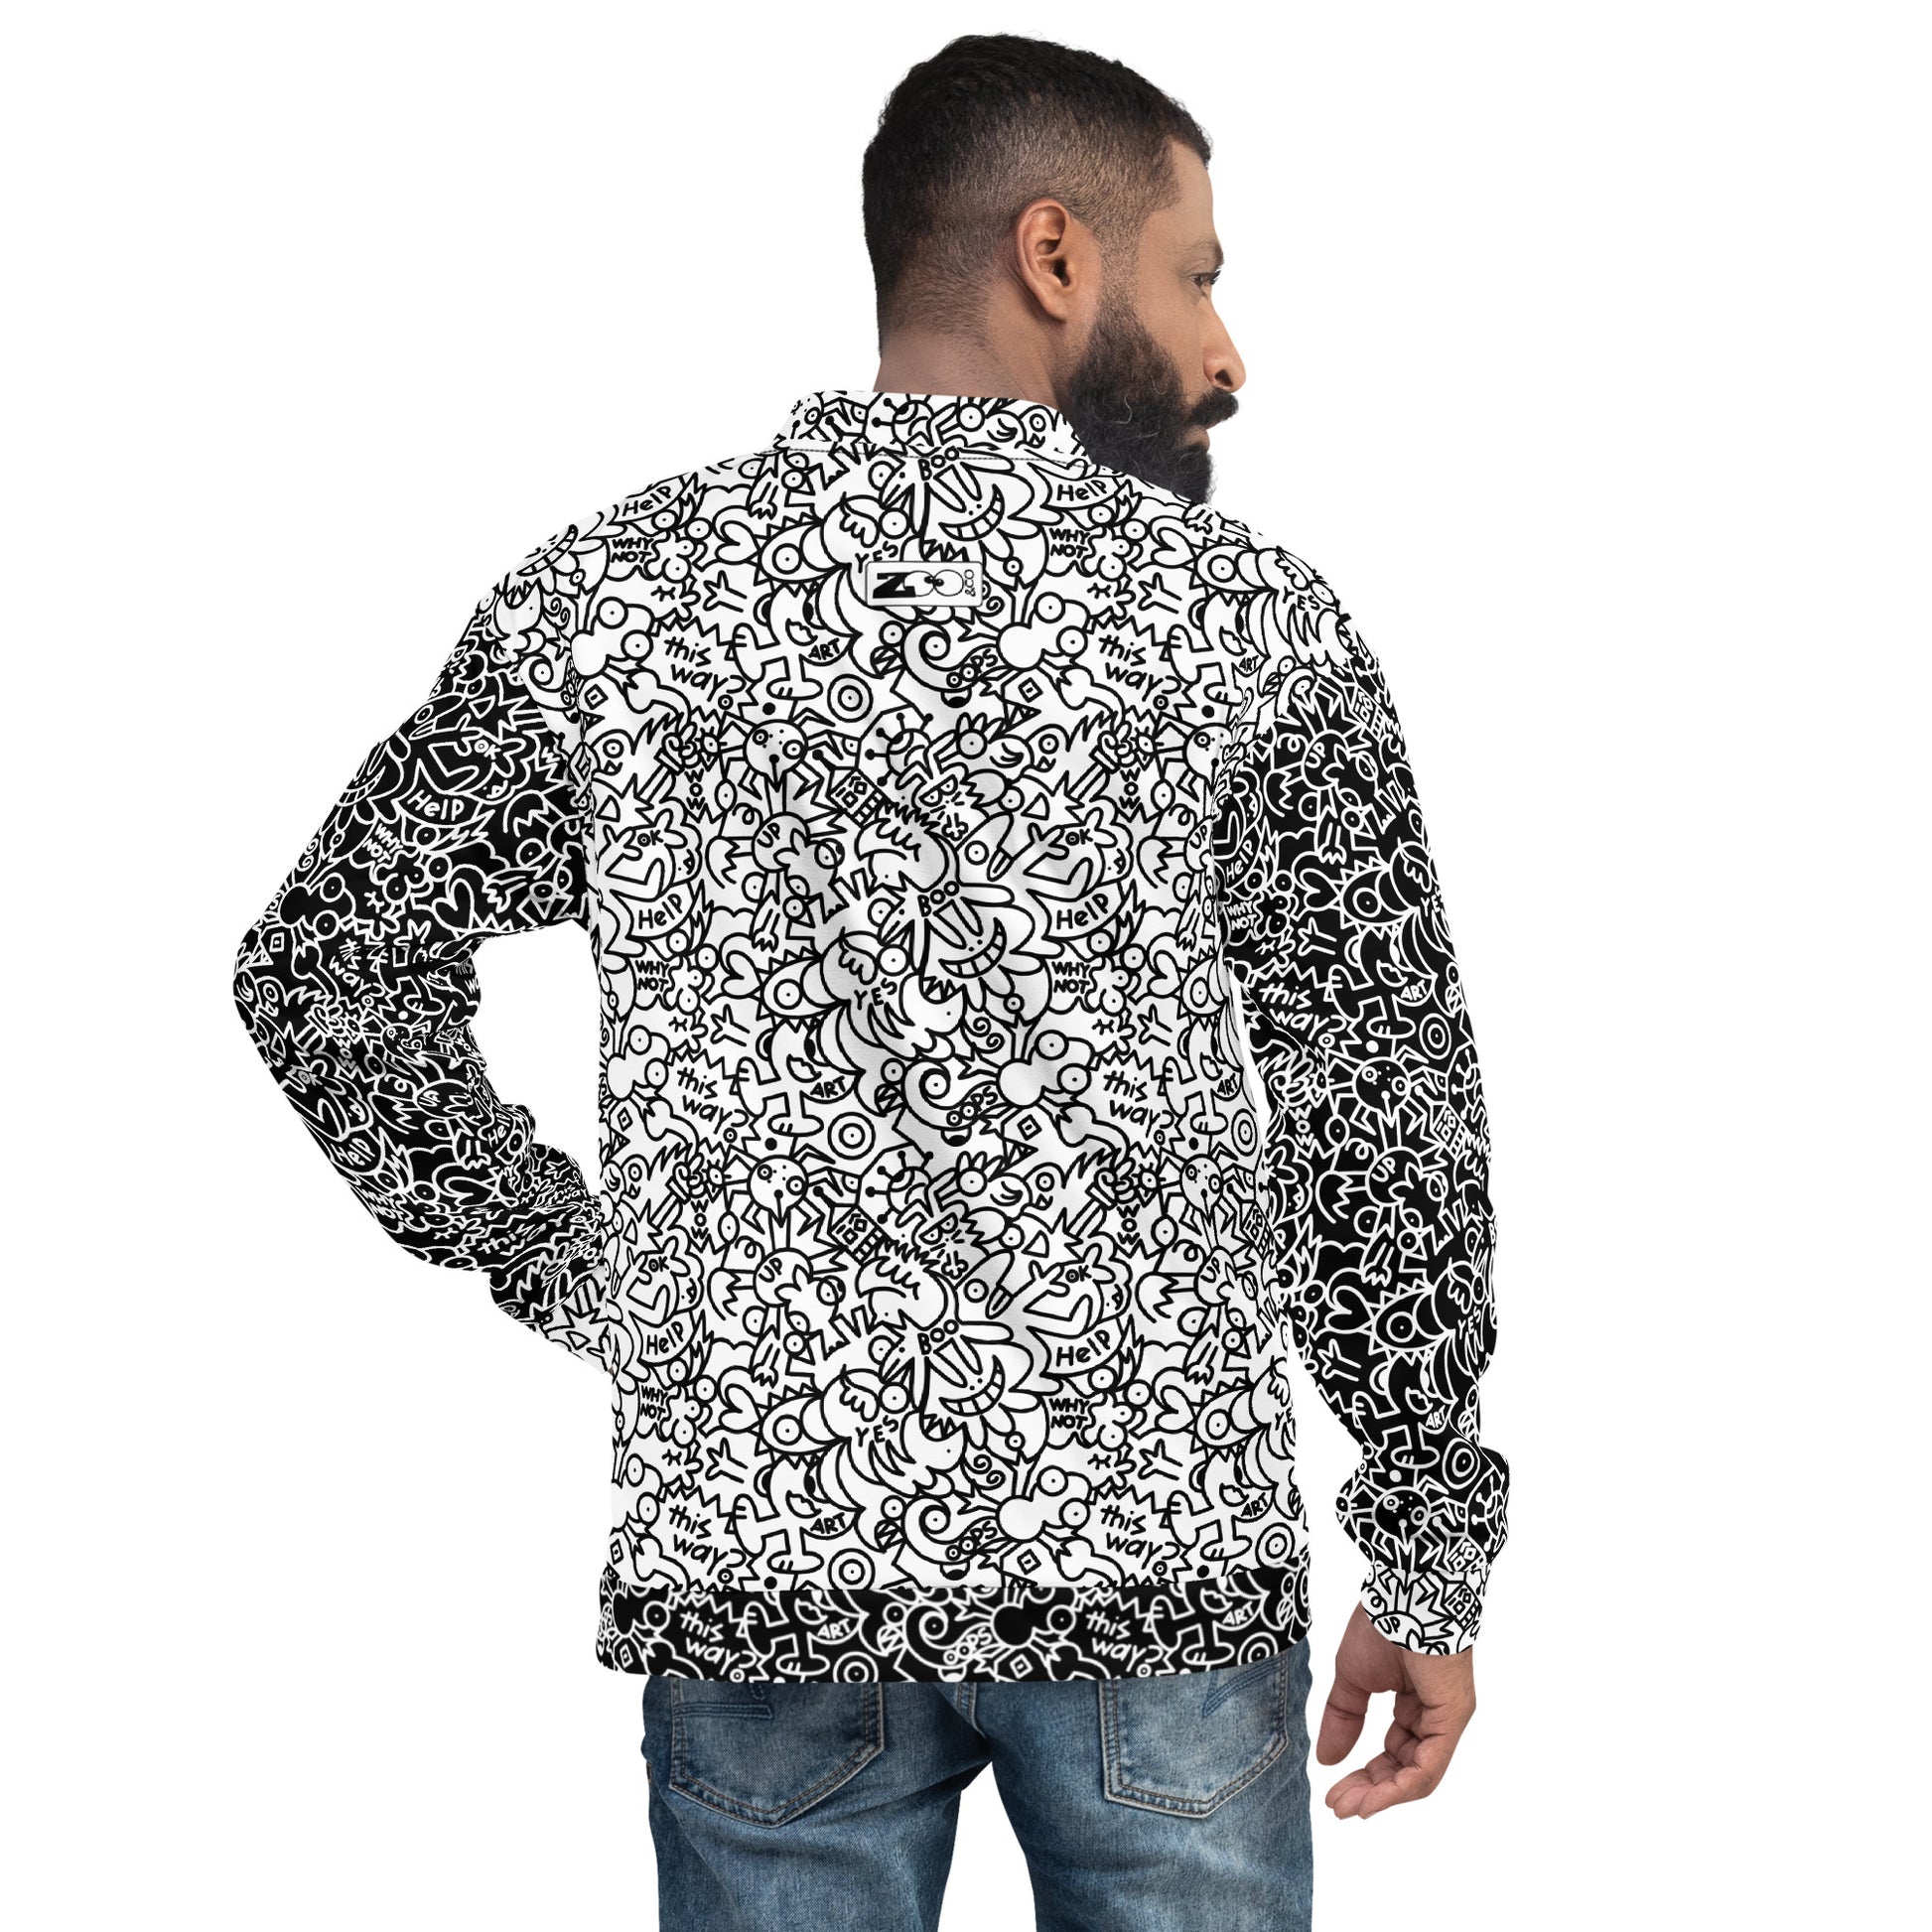 The Playful Power of Great Doodles for Bold People - Unisex Bomber Jacket. Back view